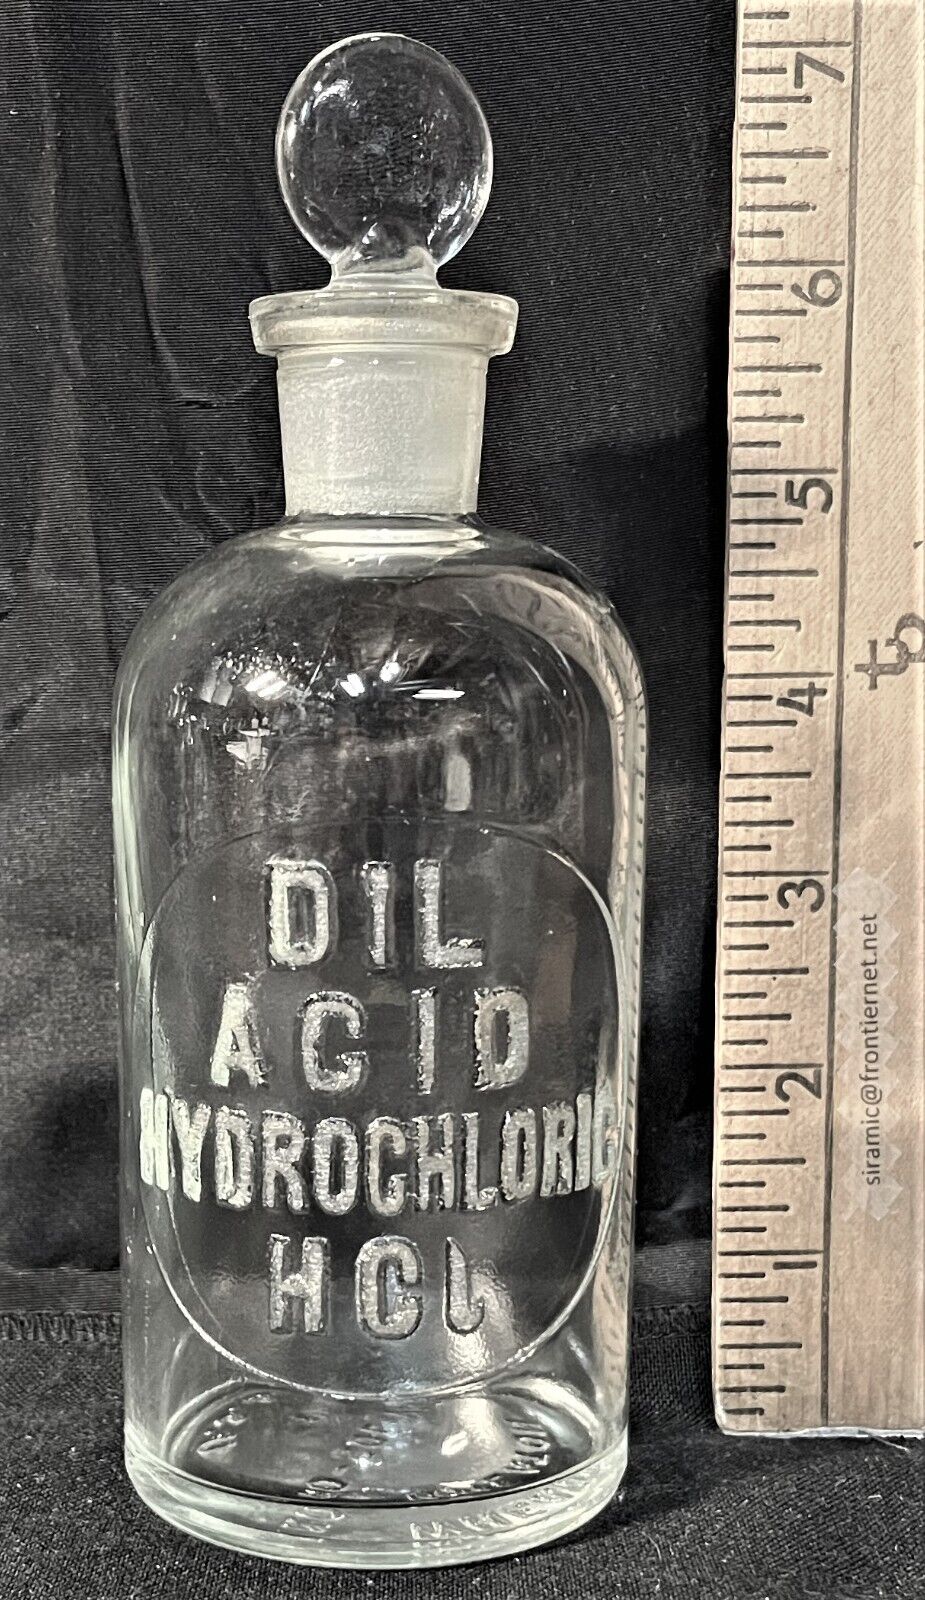 DIL ACID HYDROCHLORIC 250mL laboratory apothecary reagent science drug school A1